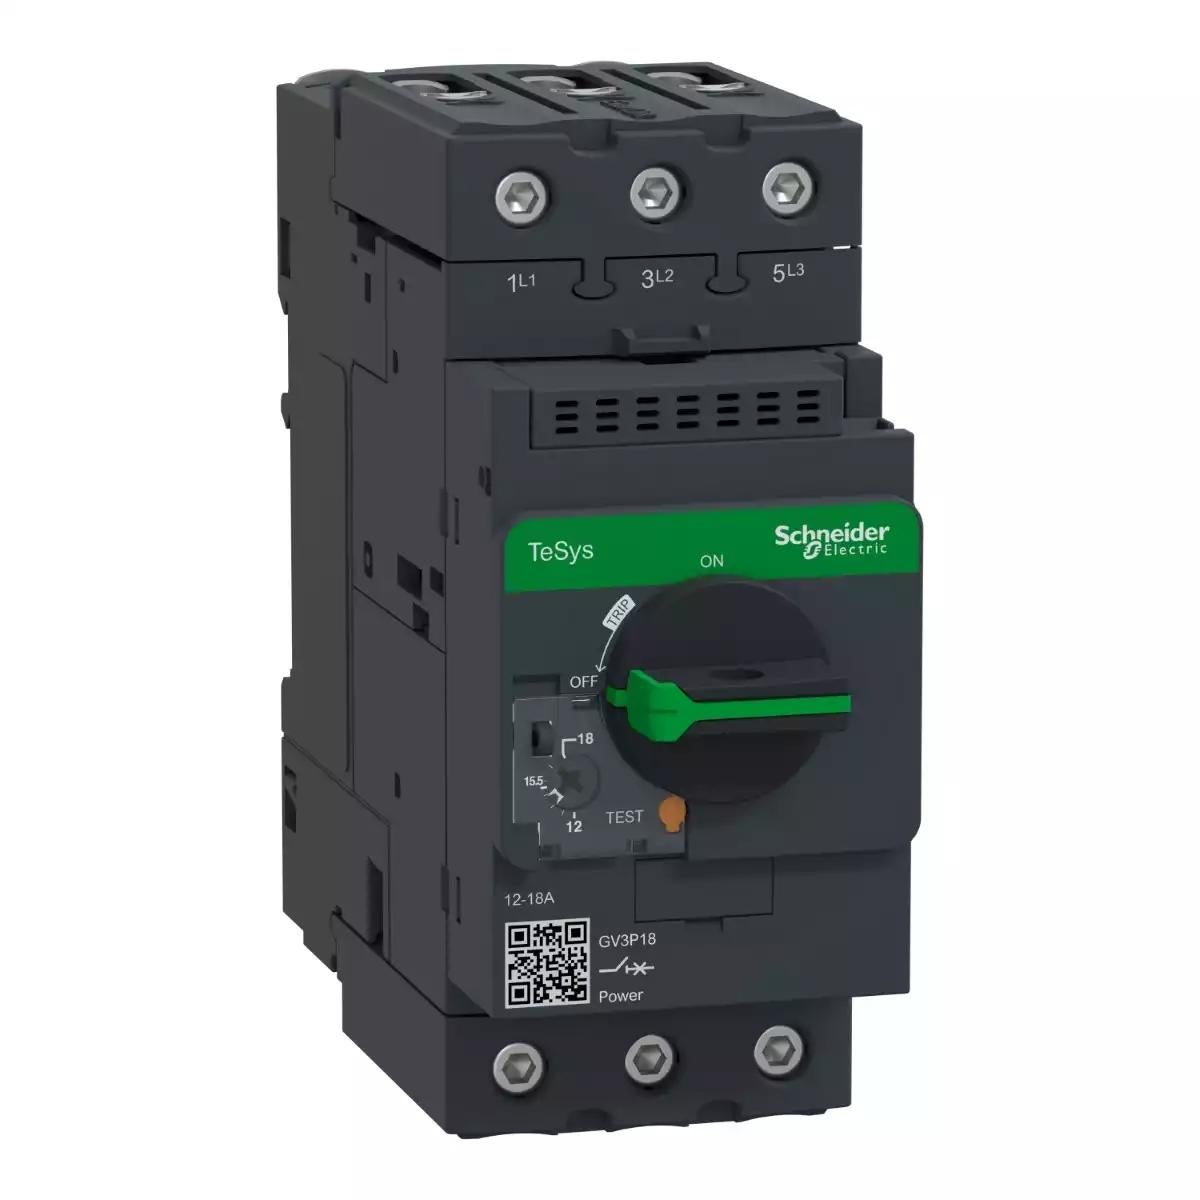 Schneider Electric TeSys GV3 Circuit breaker-thermal-magnetic - 12â€¦18A - EverLink BTR connectors